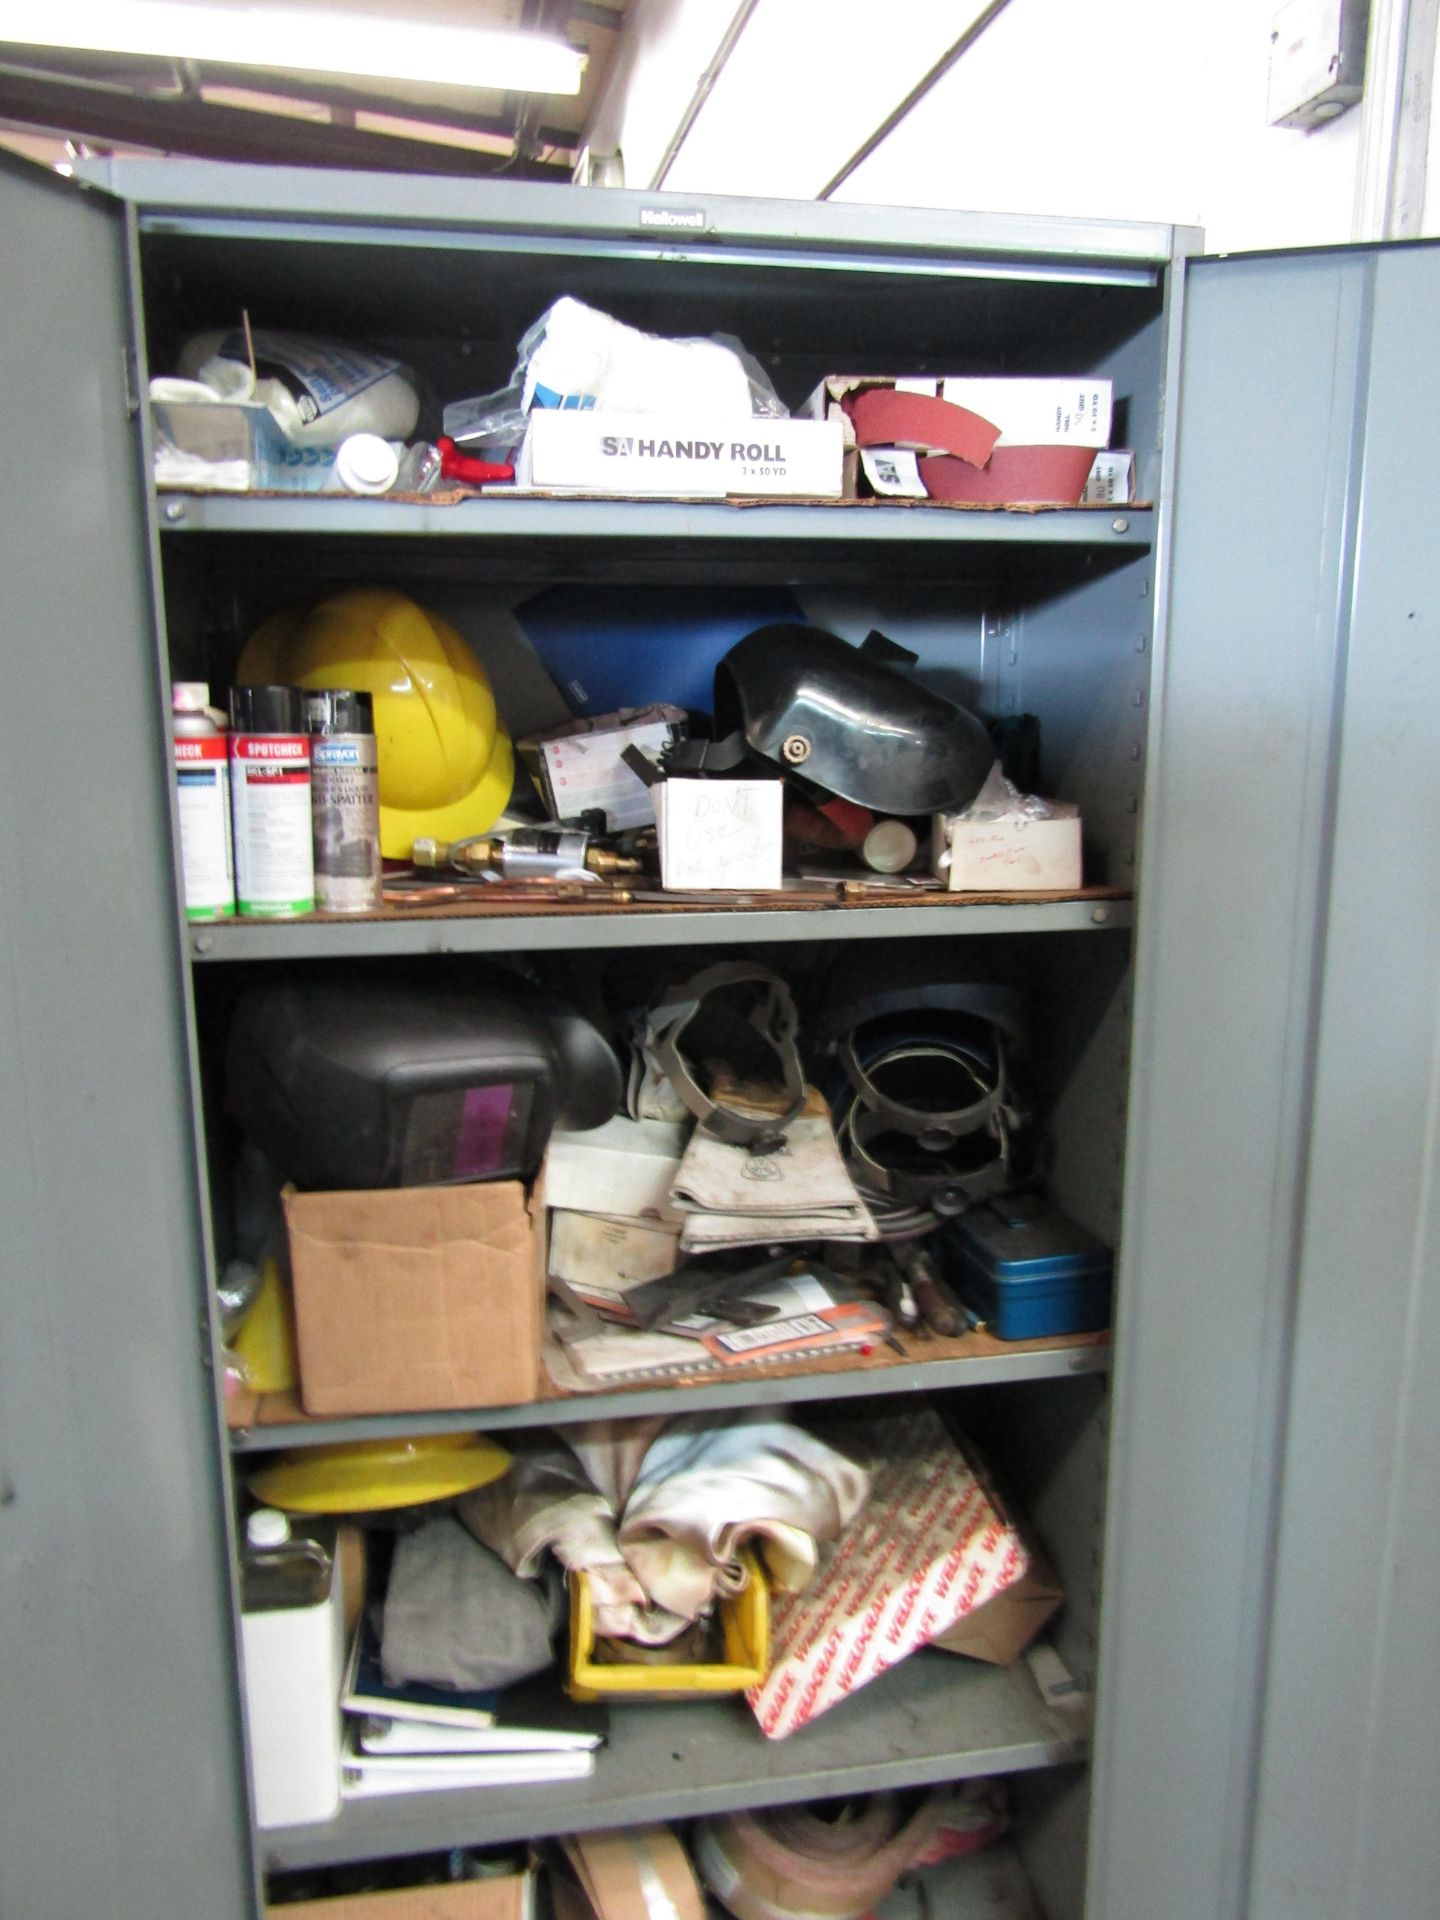 Cabinet & Contents of welding supplies, welding mask, torch, gloves, electrodes, shielding, misc. - Image 2 of 2